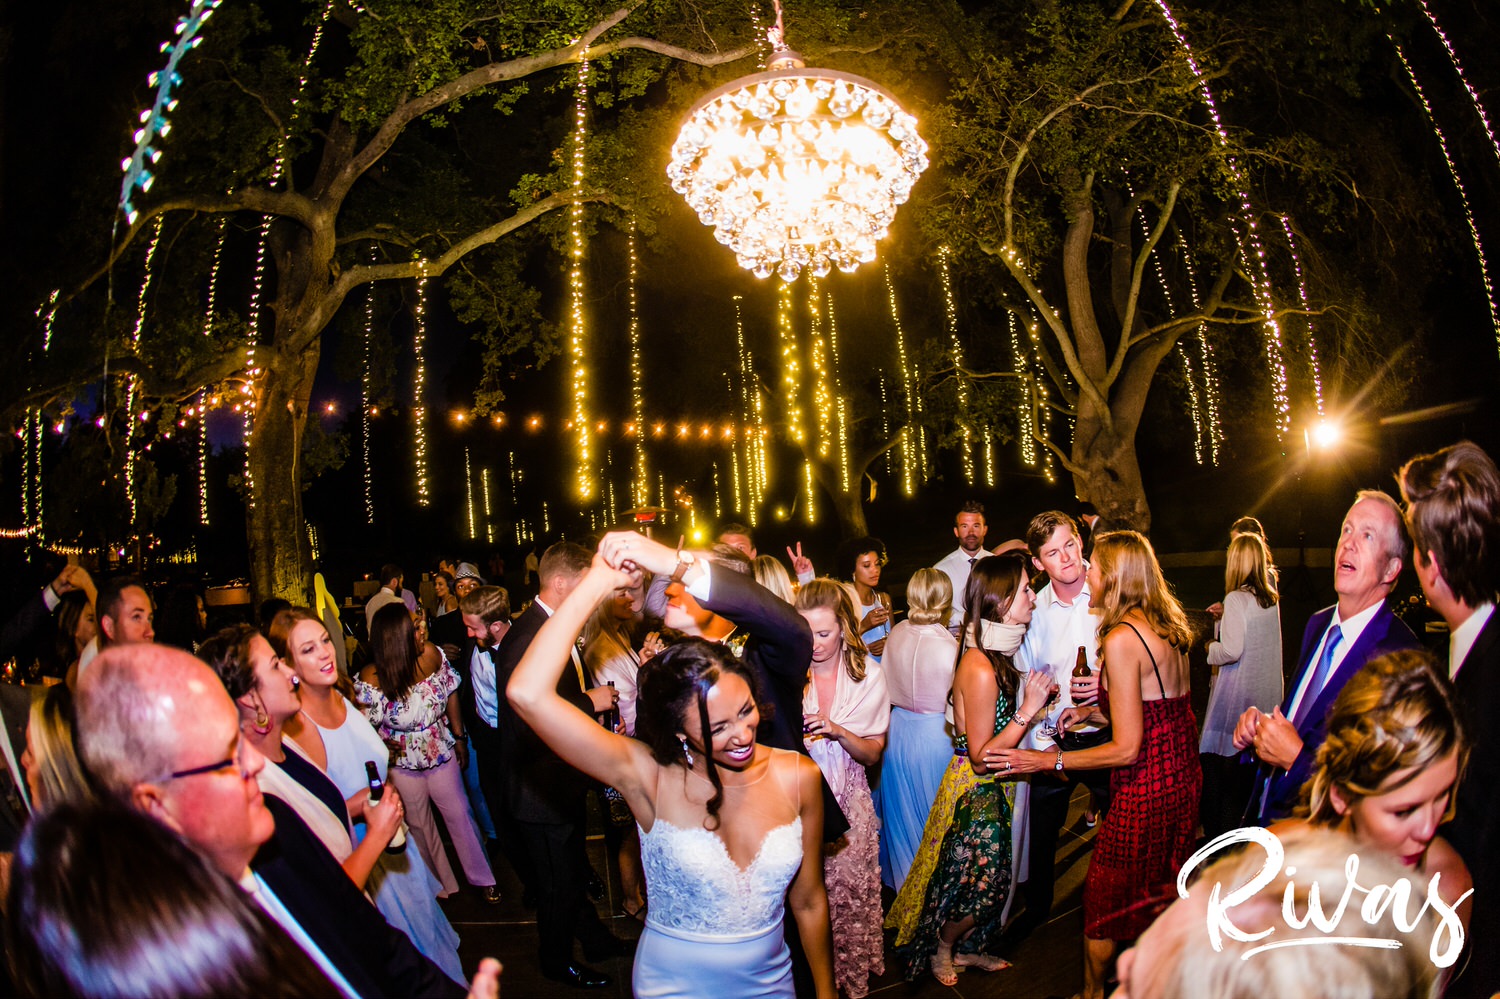 Saddlerock Ranch Summer Wedding | Destination Wedding Photographers | Rivas | A picture of a groom twirling his bride underneath his arm as they dance outside underneath a chandelier and ropes of twinkly lights during their Saddlerock Ranch Wedding Reception in Malibu, California. 